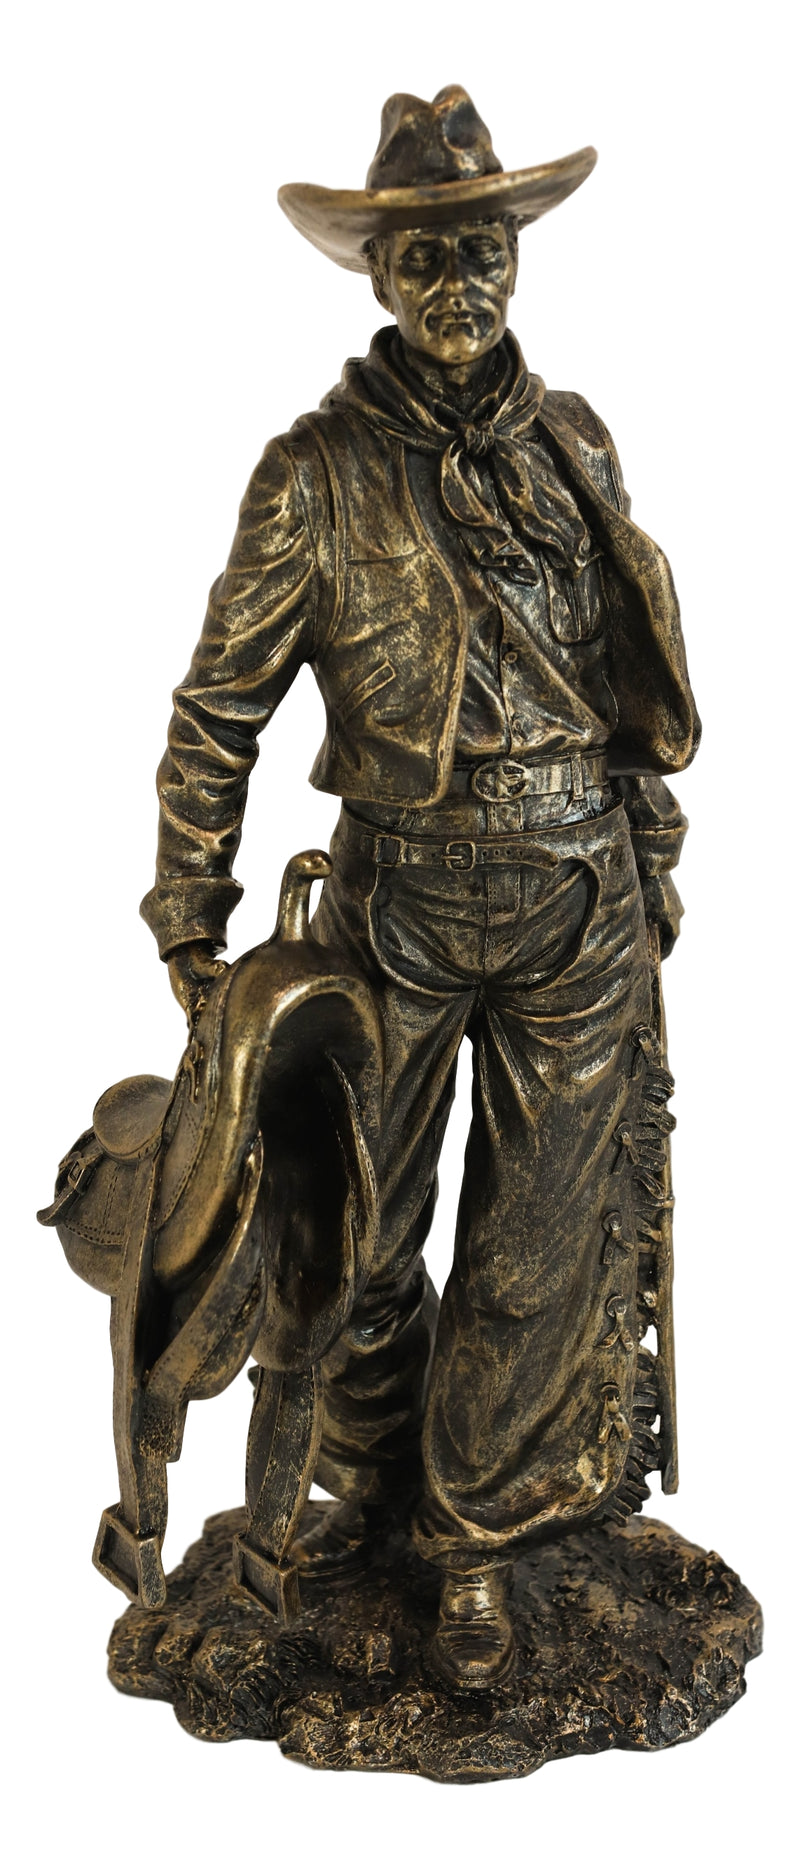 Old World Rustic Western Cowboy Holding Horse Saddle and Rifle Gun Statue 12"H